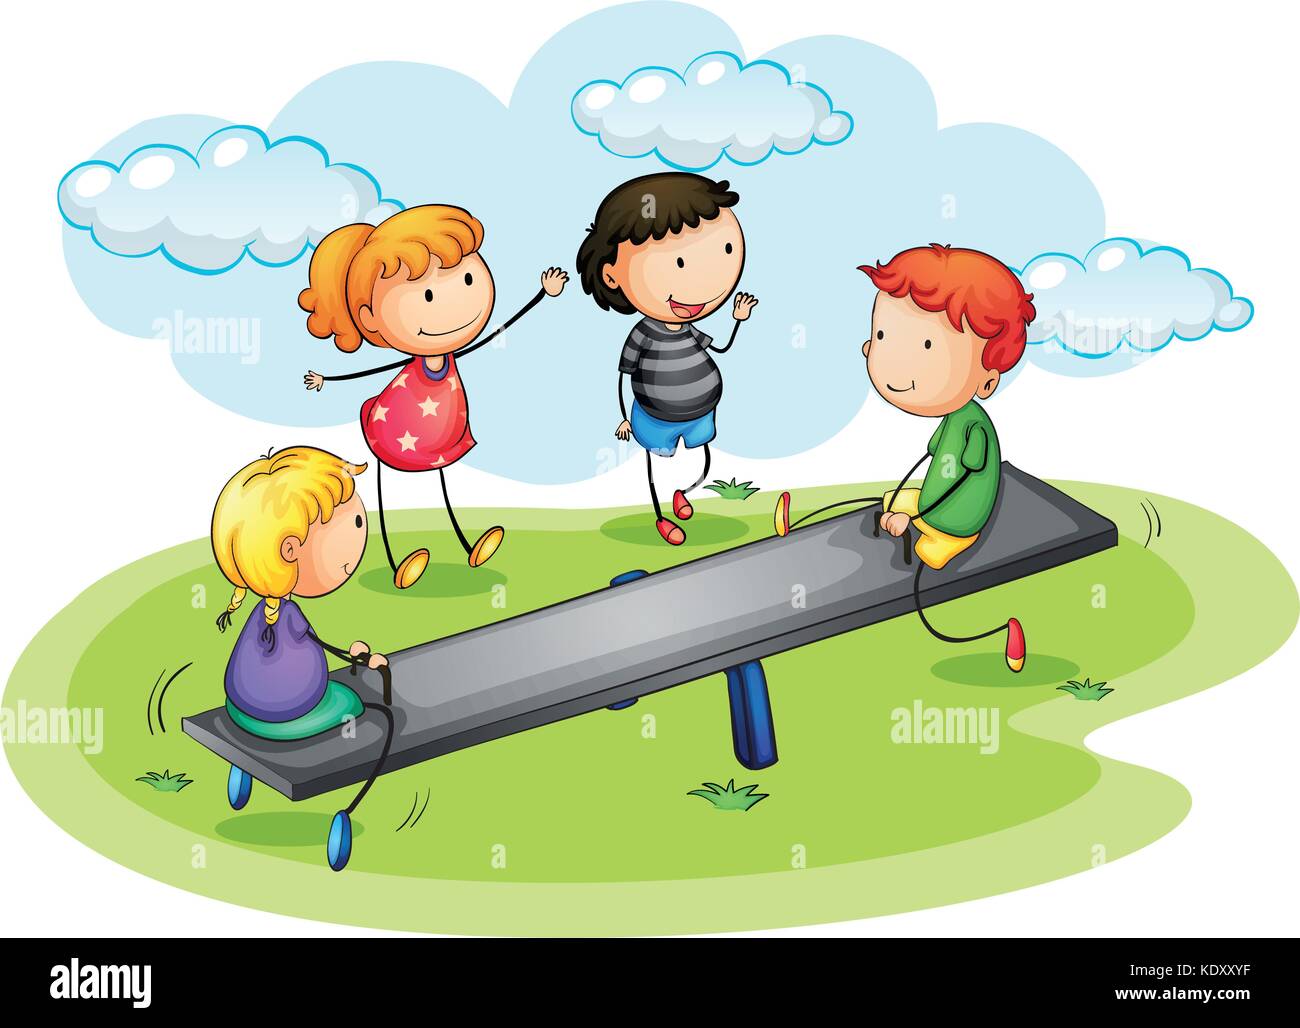 Kids playing seesaw in the park illustration Stock Vector